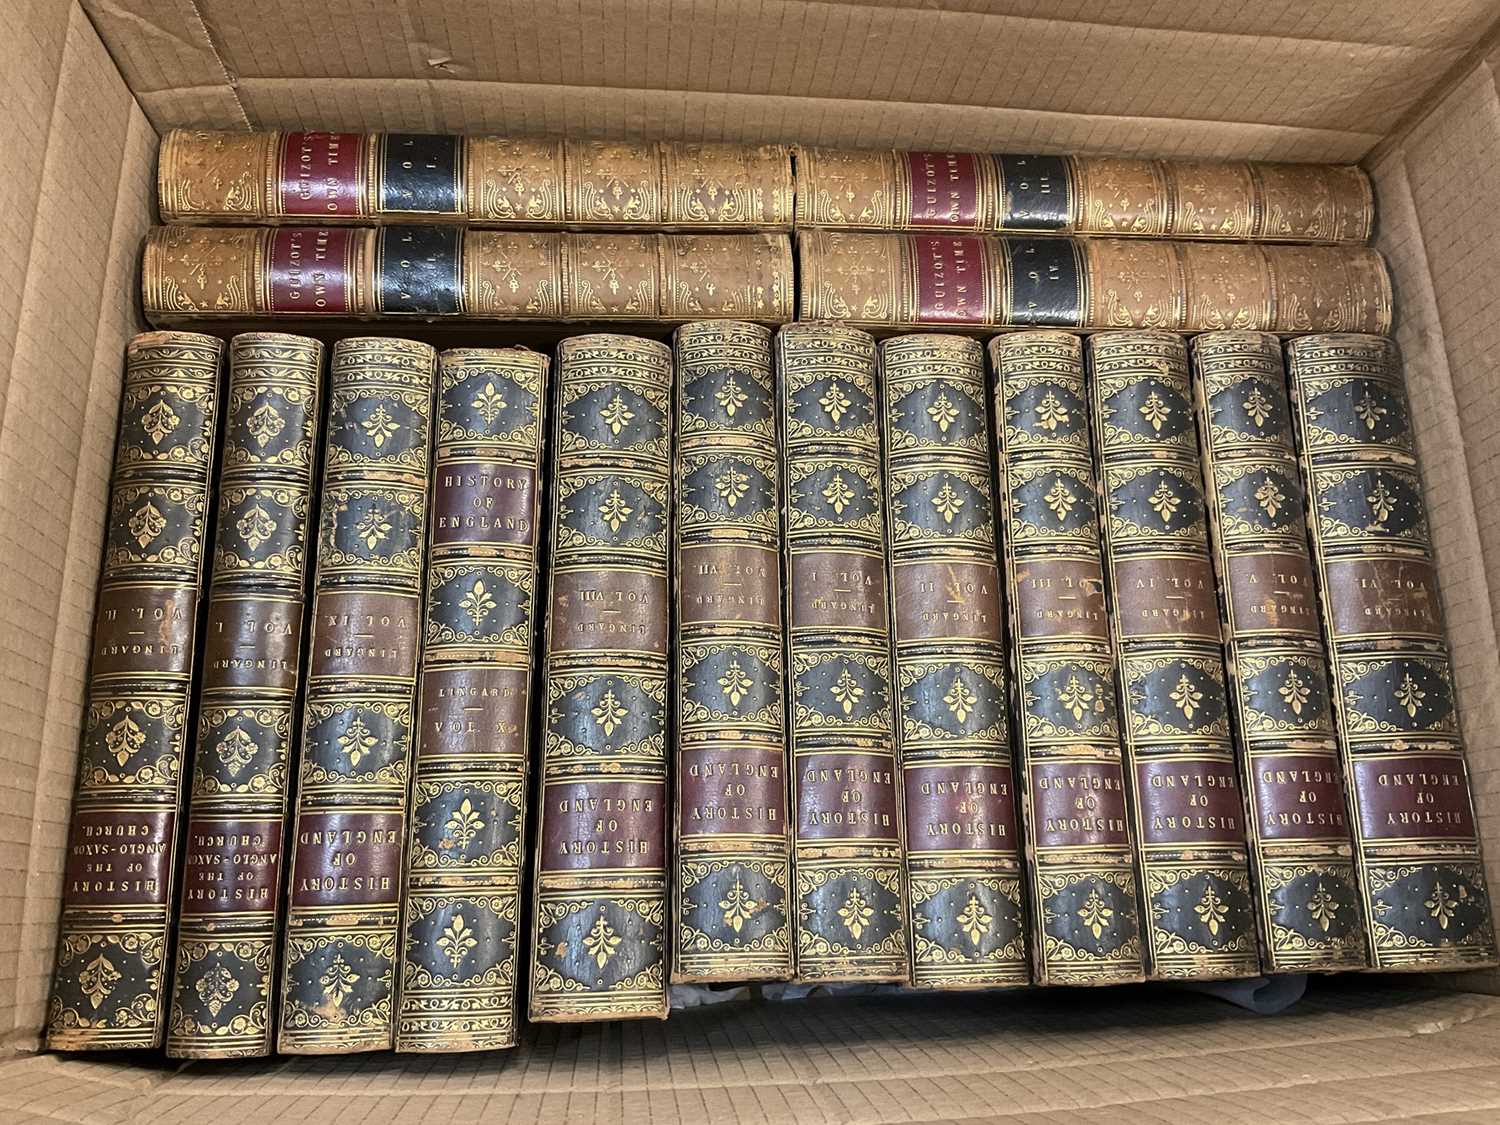 John Lingard - The History of England, fifth edition in 10 volumes, London, Charles Dolman 1849, 8vo